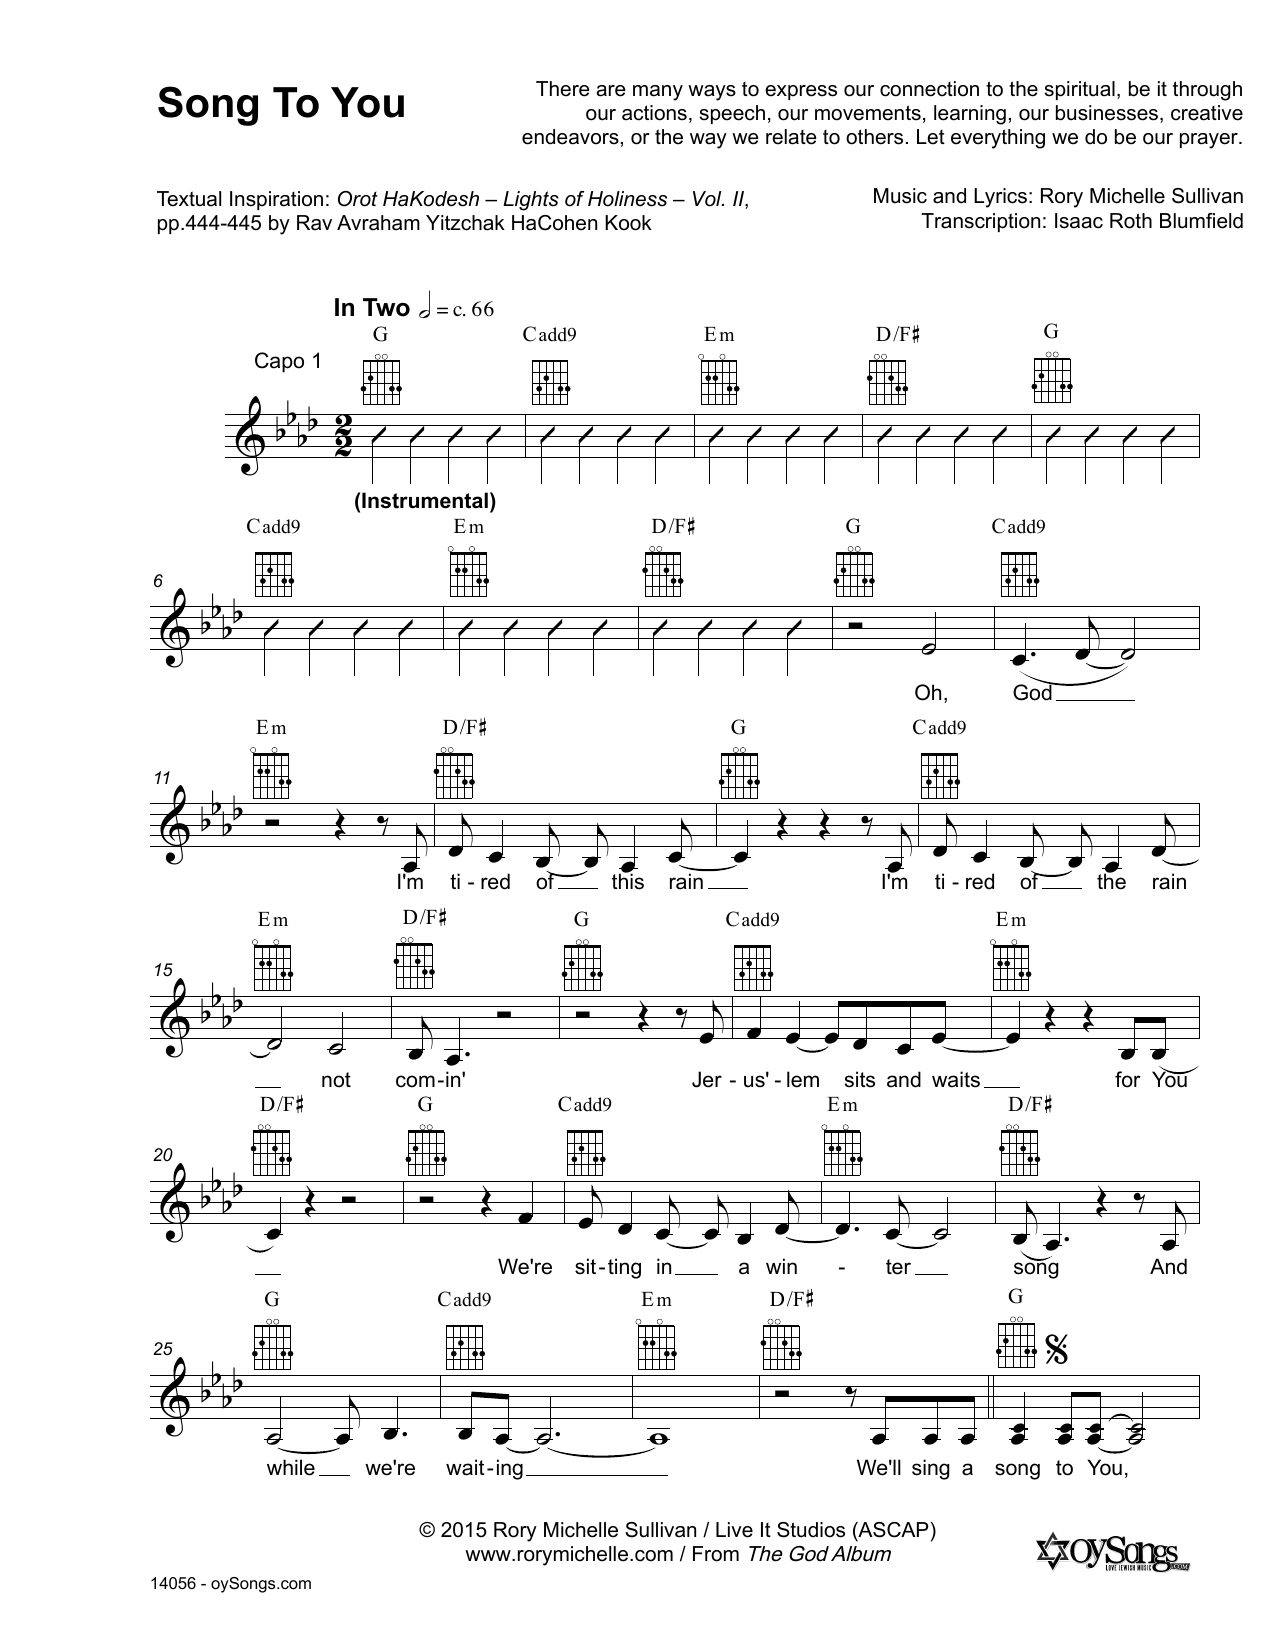 Download Rory Michelle Sullivan Song To You Sheet Music